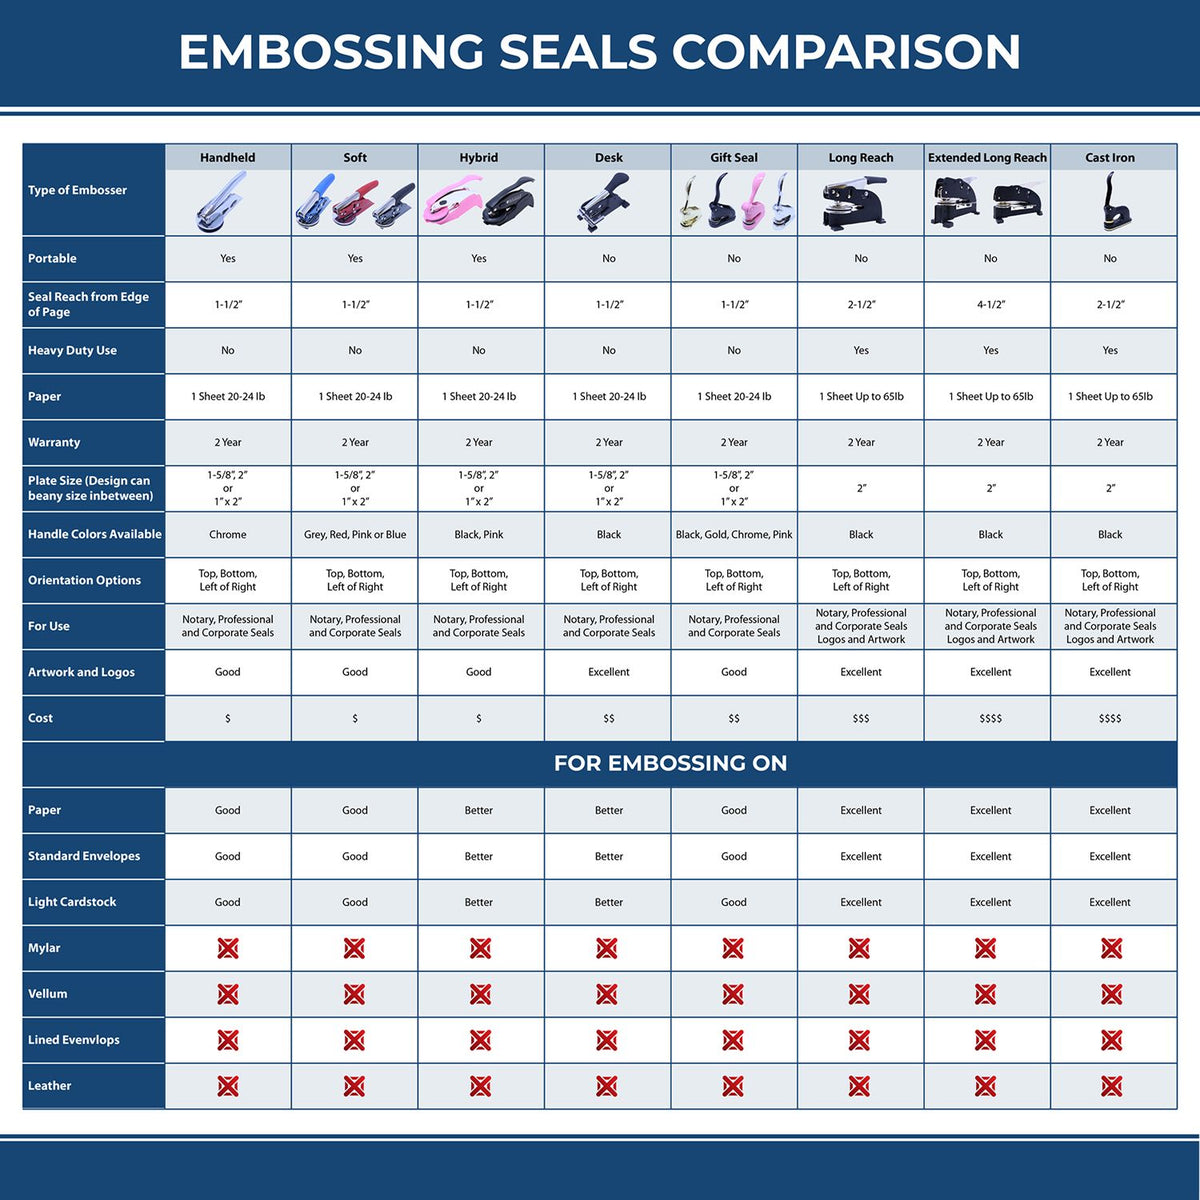 A comparison chart for the different types of mount models available for the Gift Alabama Land Surveyor Seal